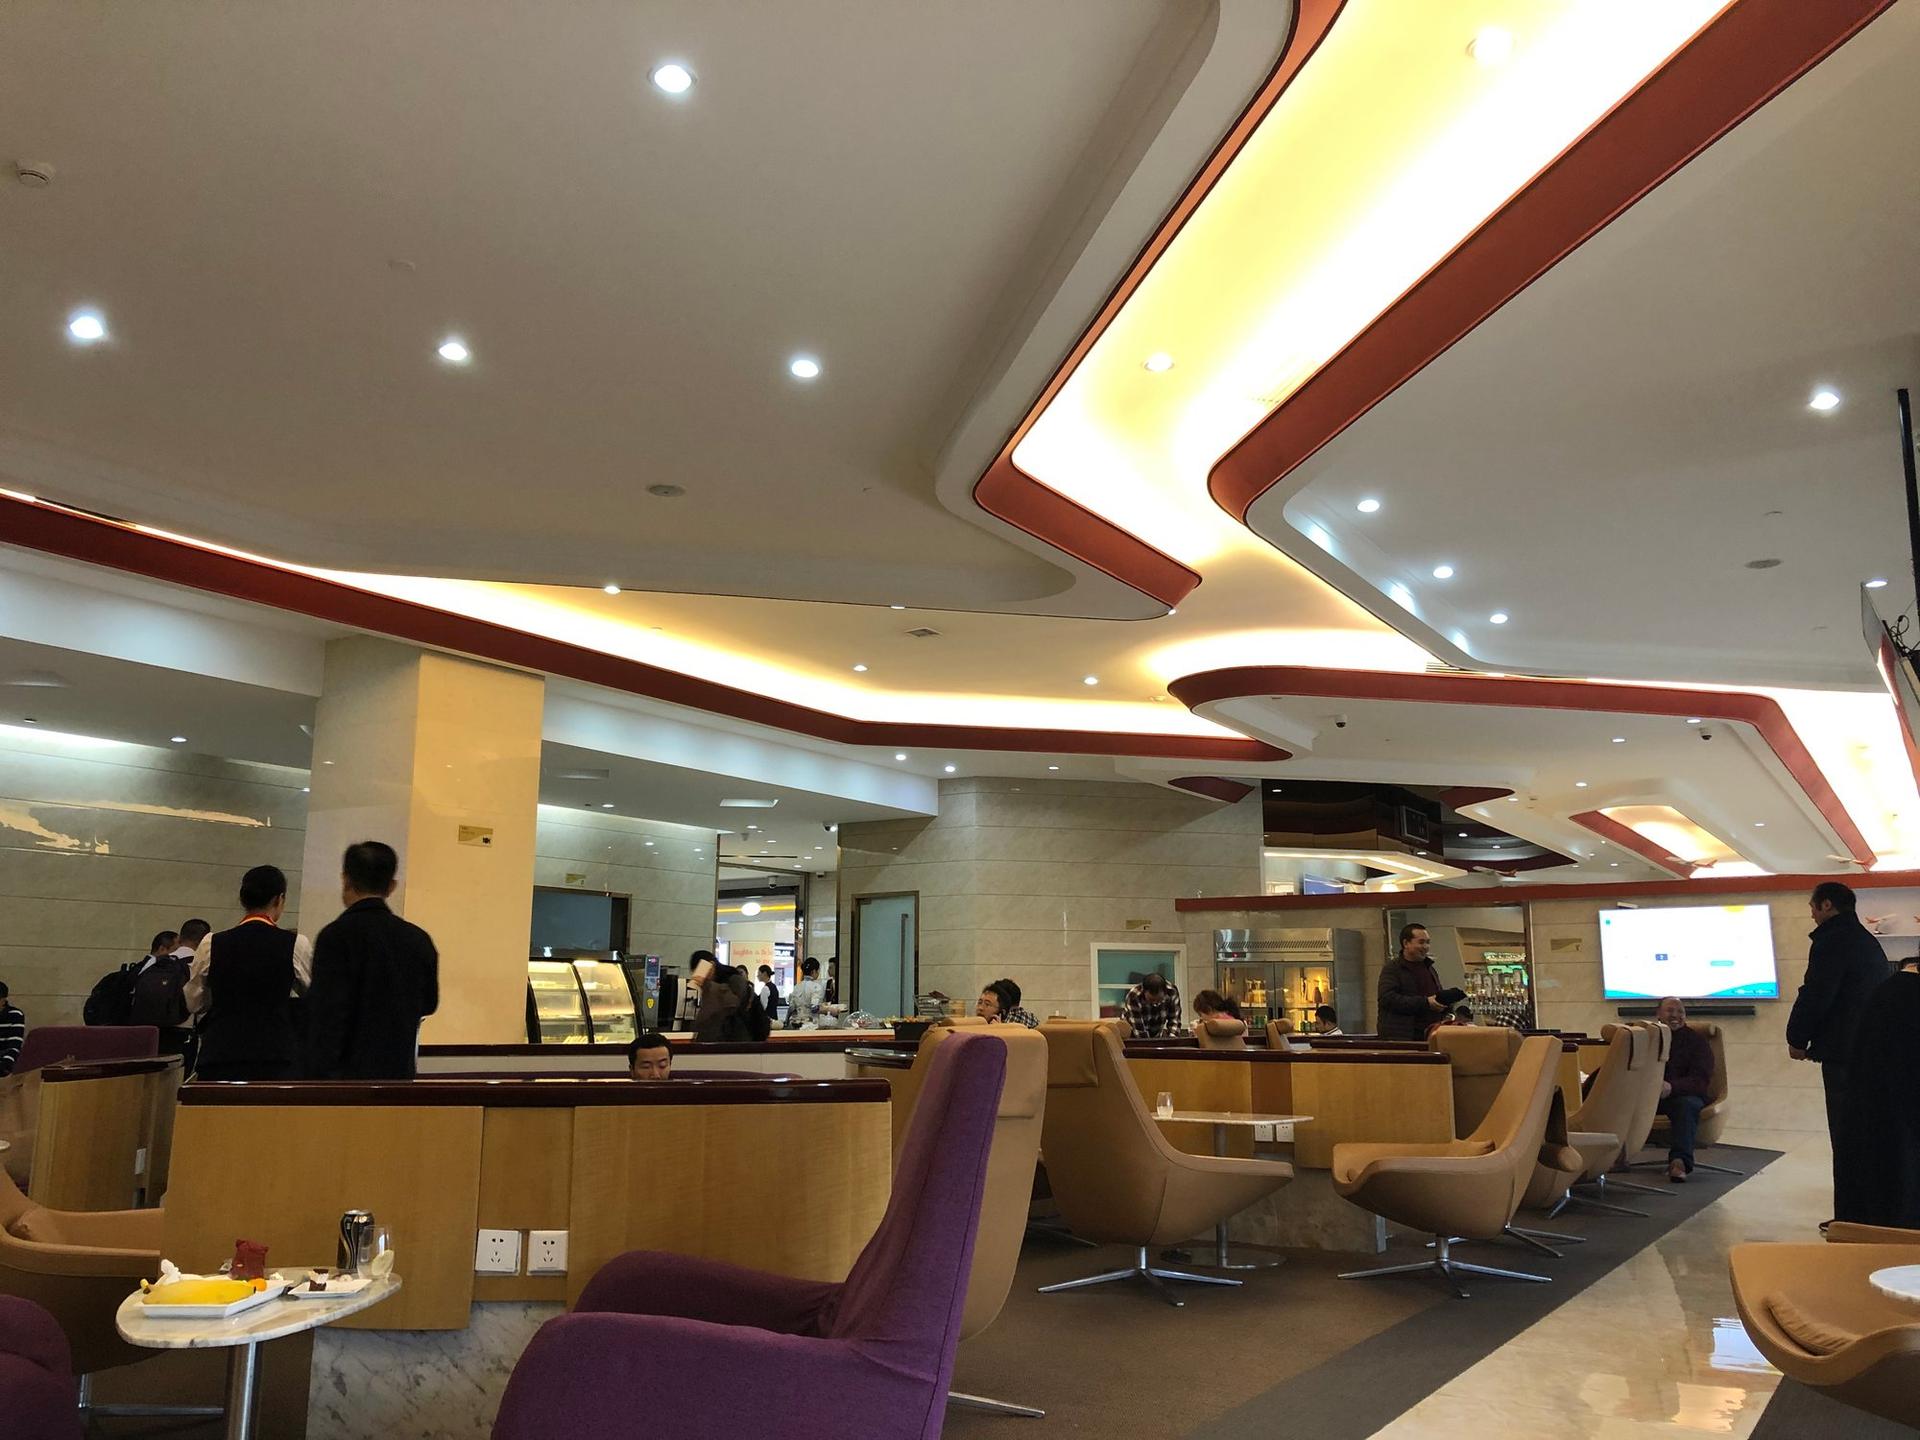 Hainan Airlines Lounge image 2 of 2